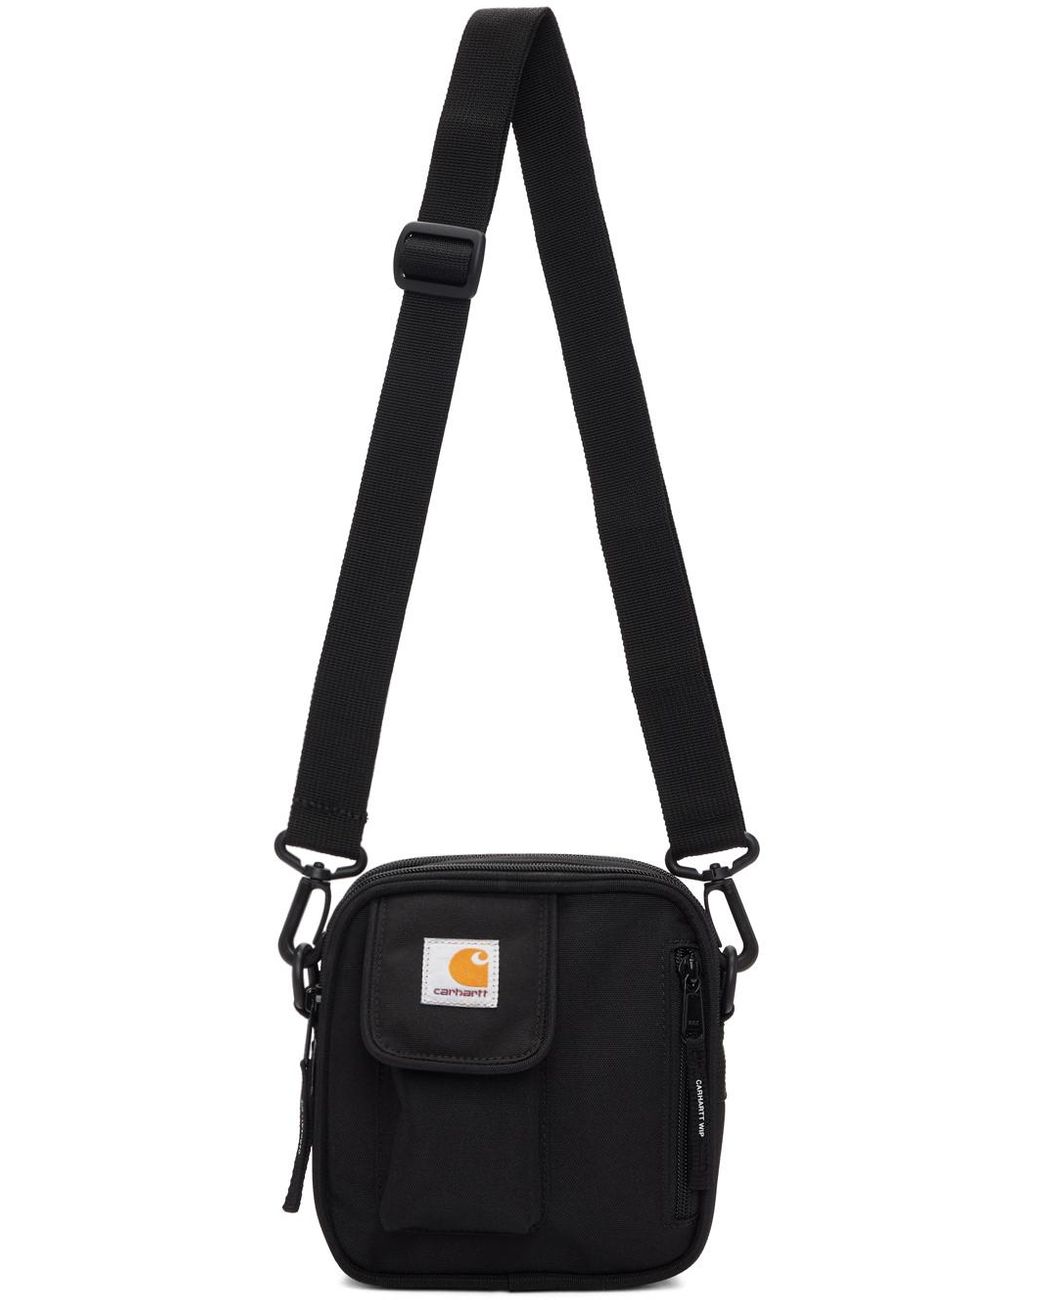 Carhartt WIP Black Small Essentials Pouch for Men - Lyst